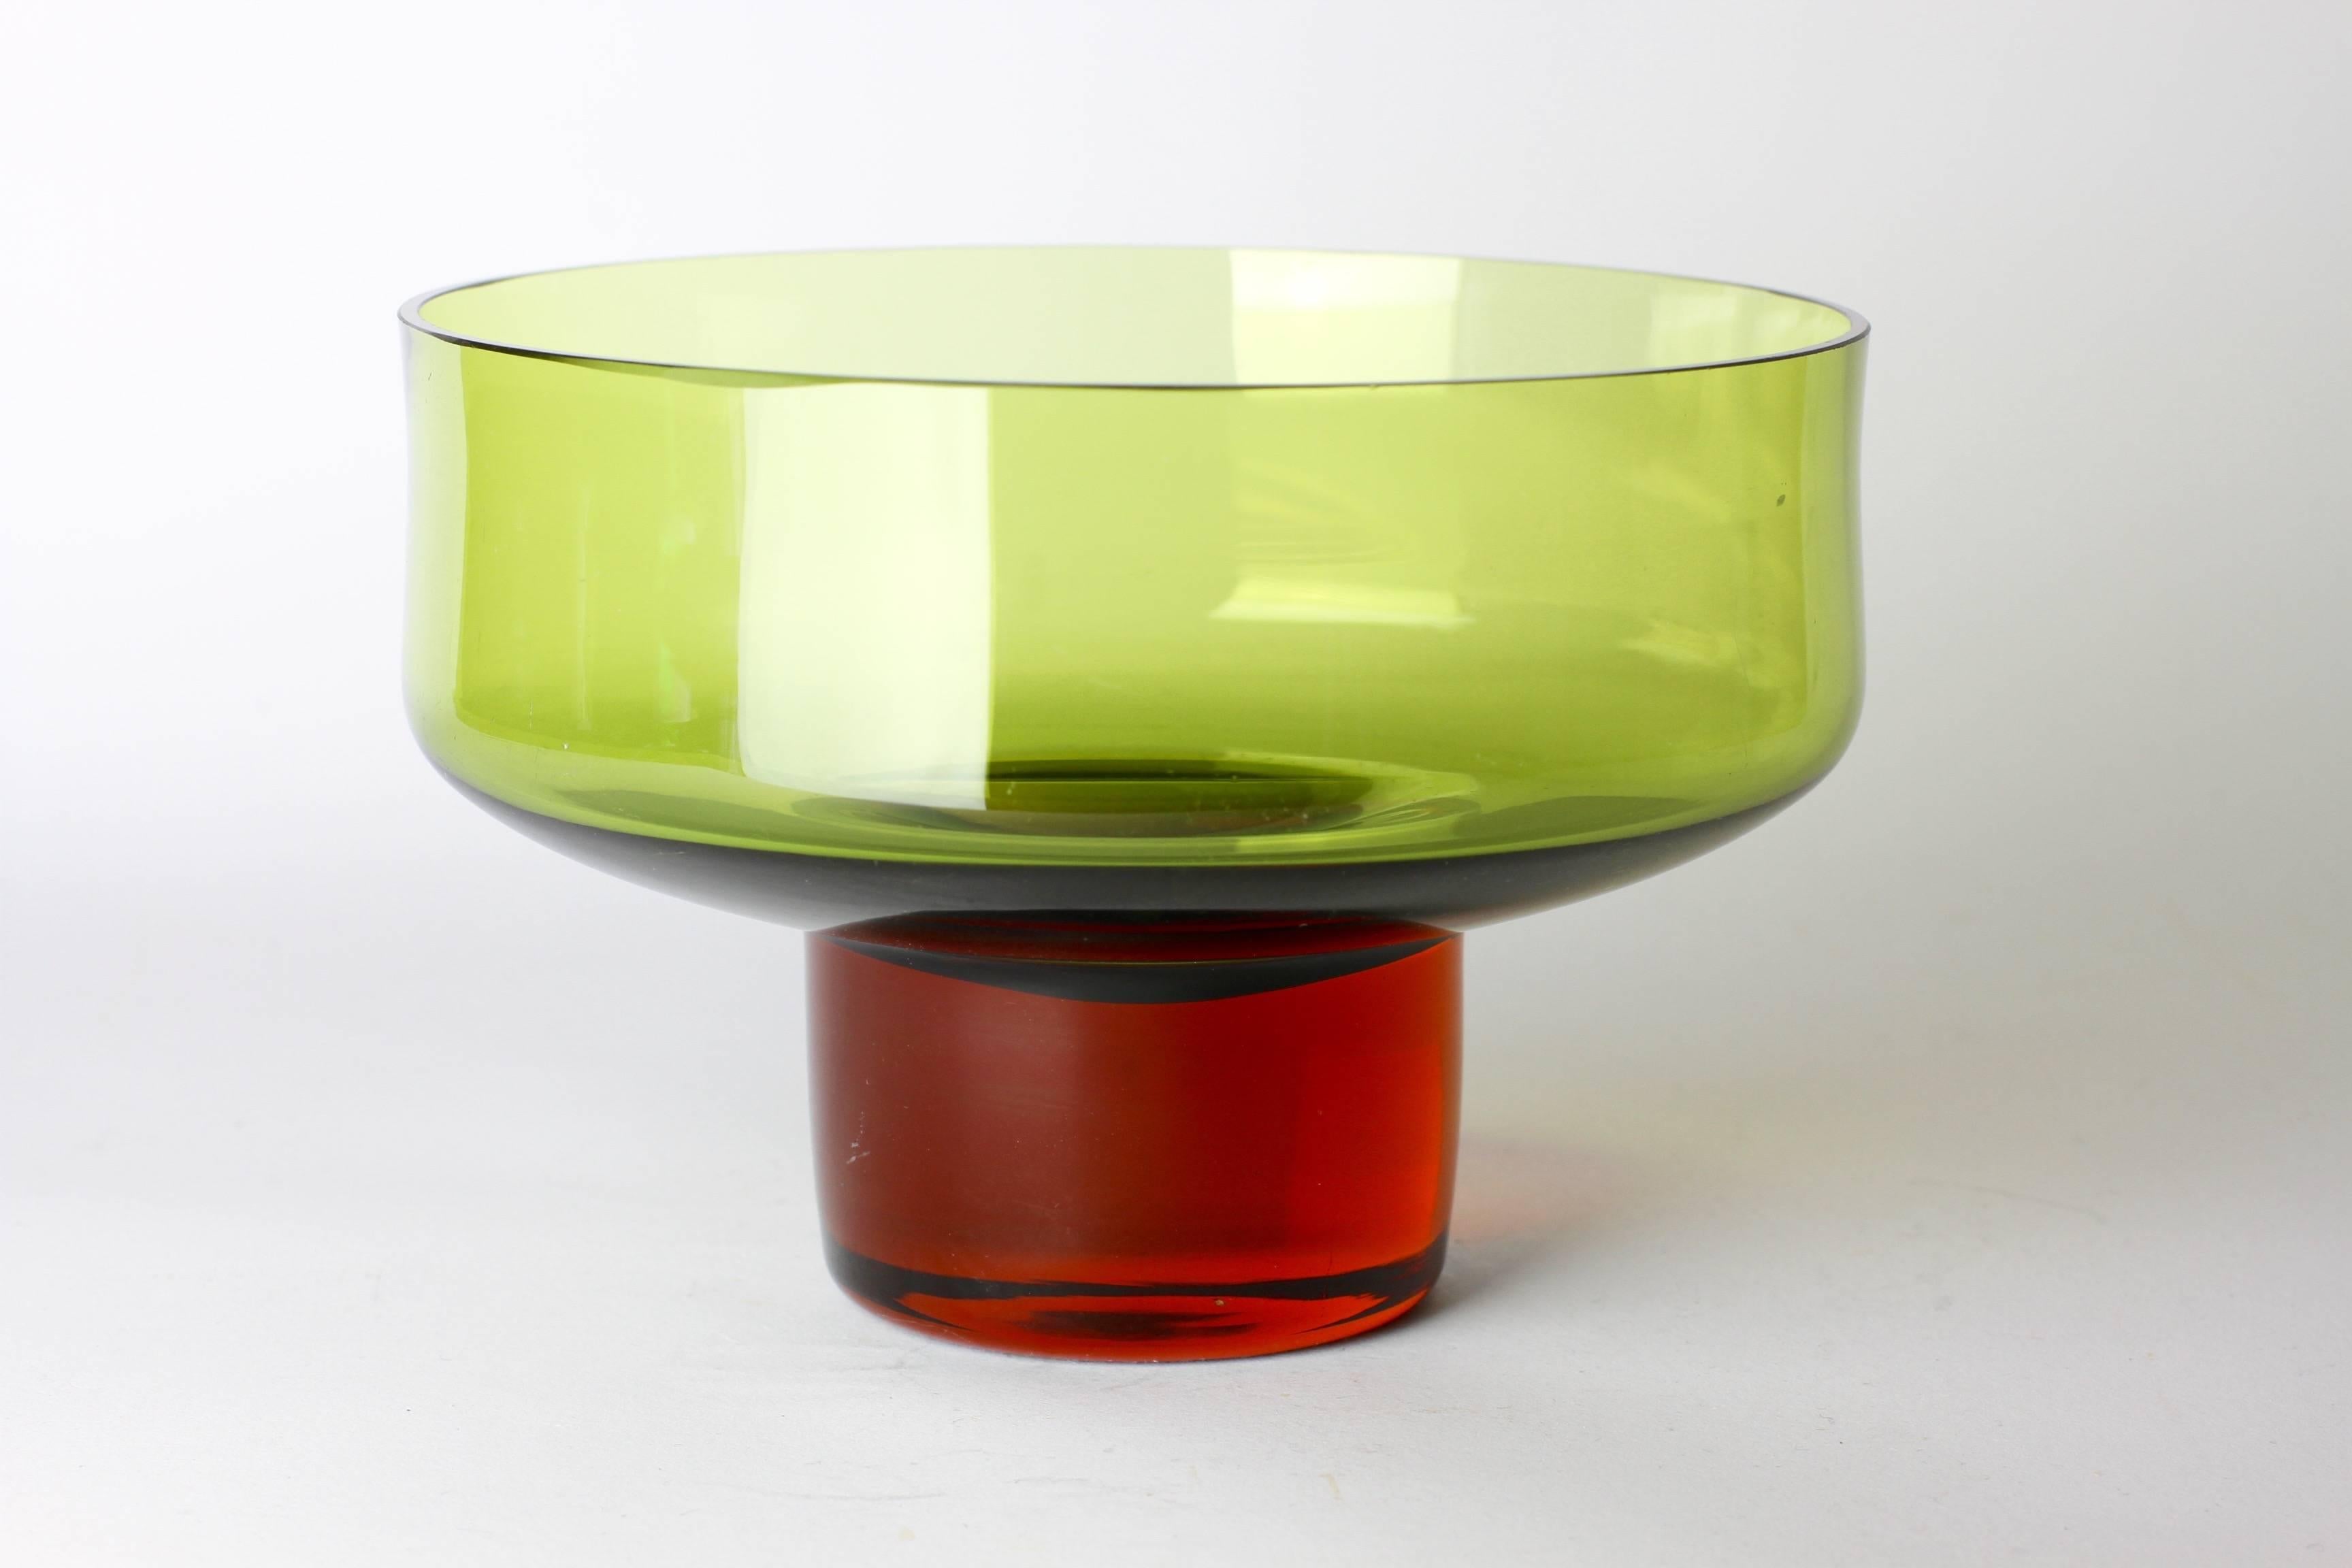 Beautiful green and amber toned glass bowl or dish designed by Bo Borgström for Aseda Glasbruk, Sweden. The thin, delicate green wall of the bowl, coupled with the thick, heavy amber base, gives this Scandinavian bowl it's delightful charm.

Model